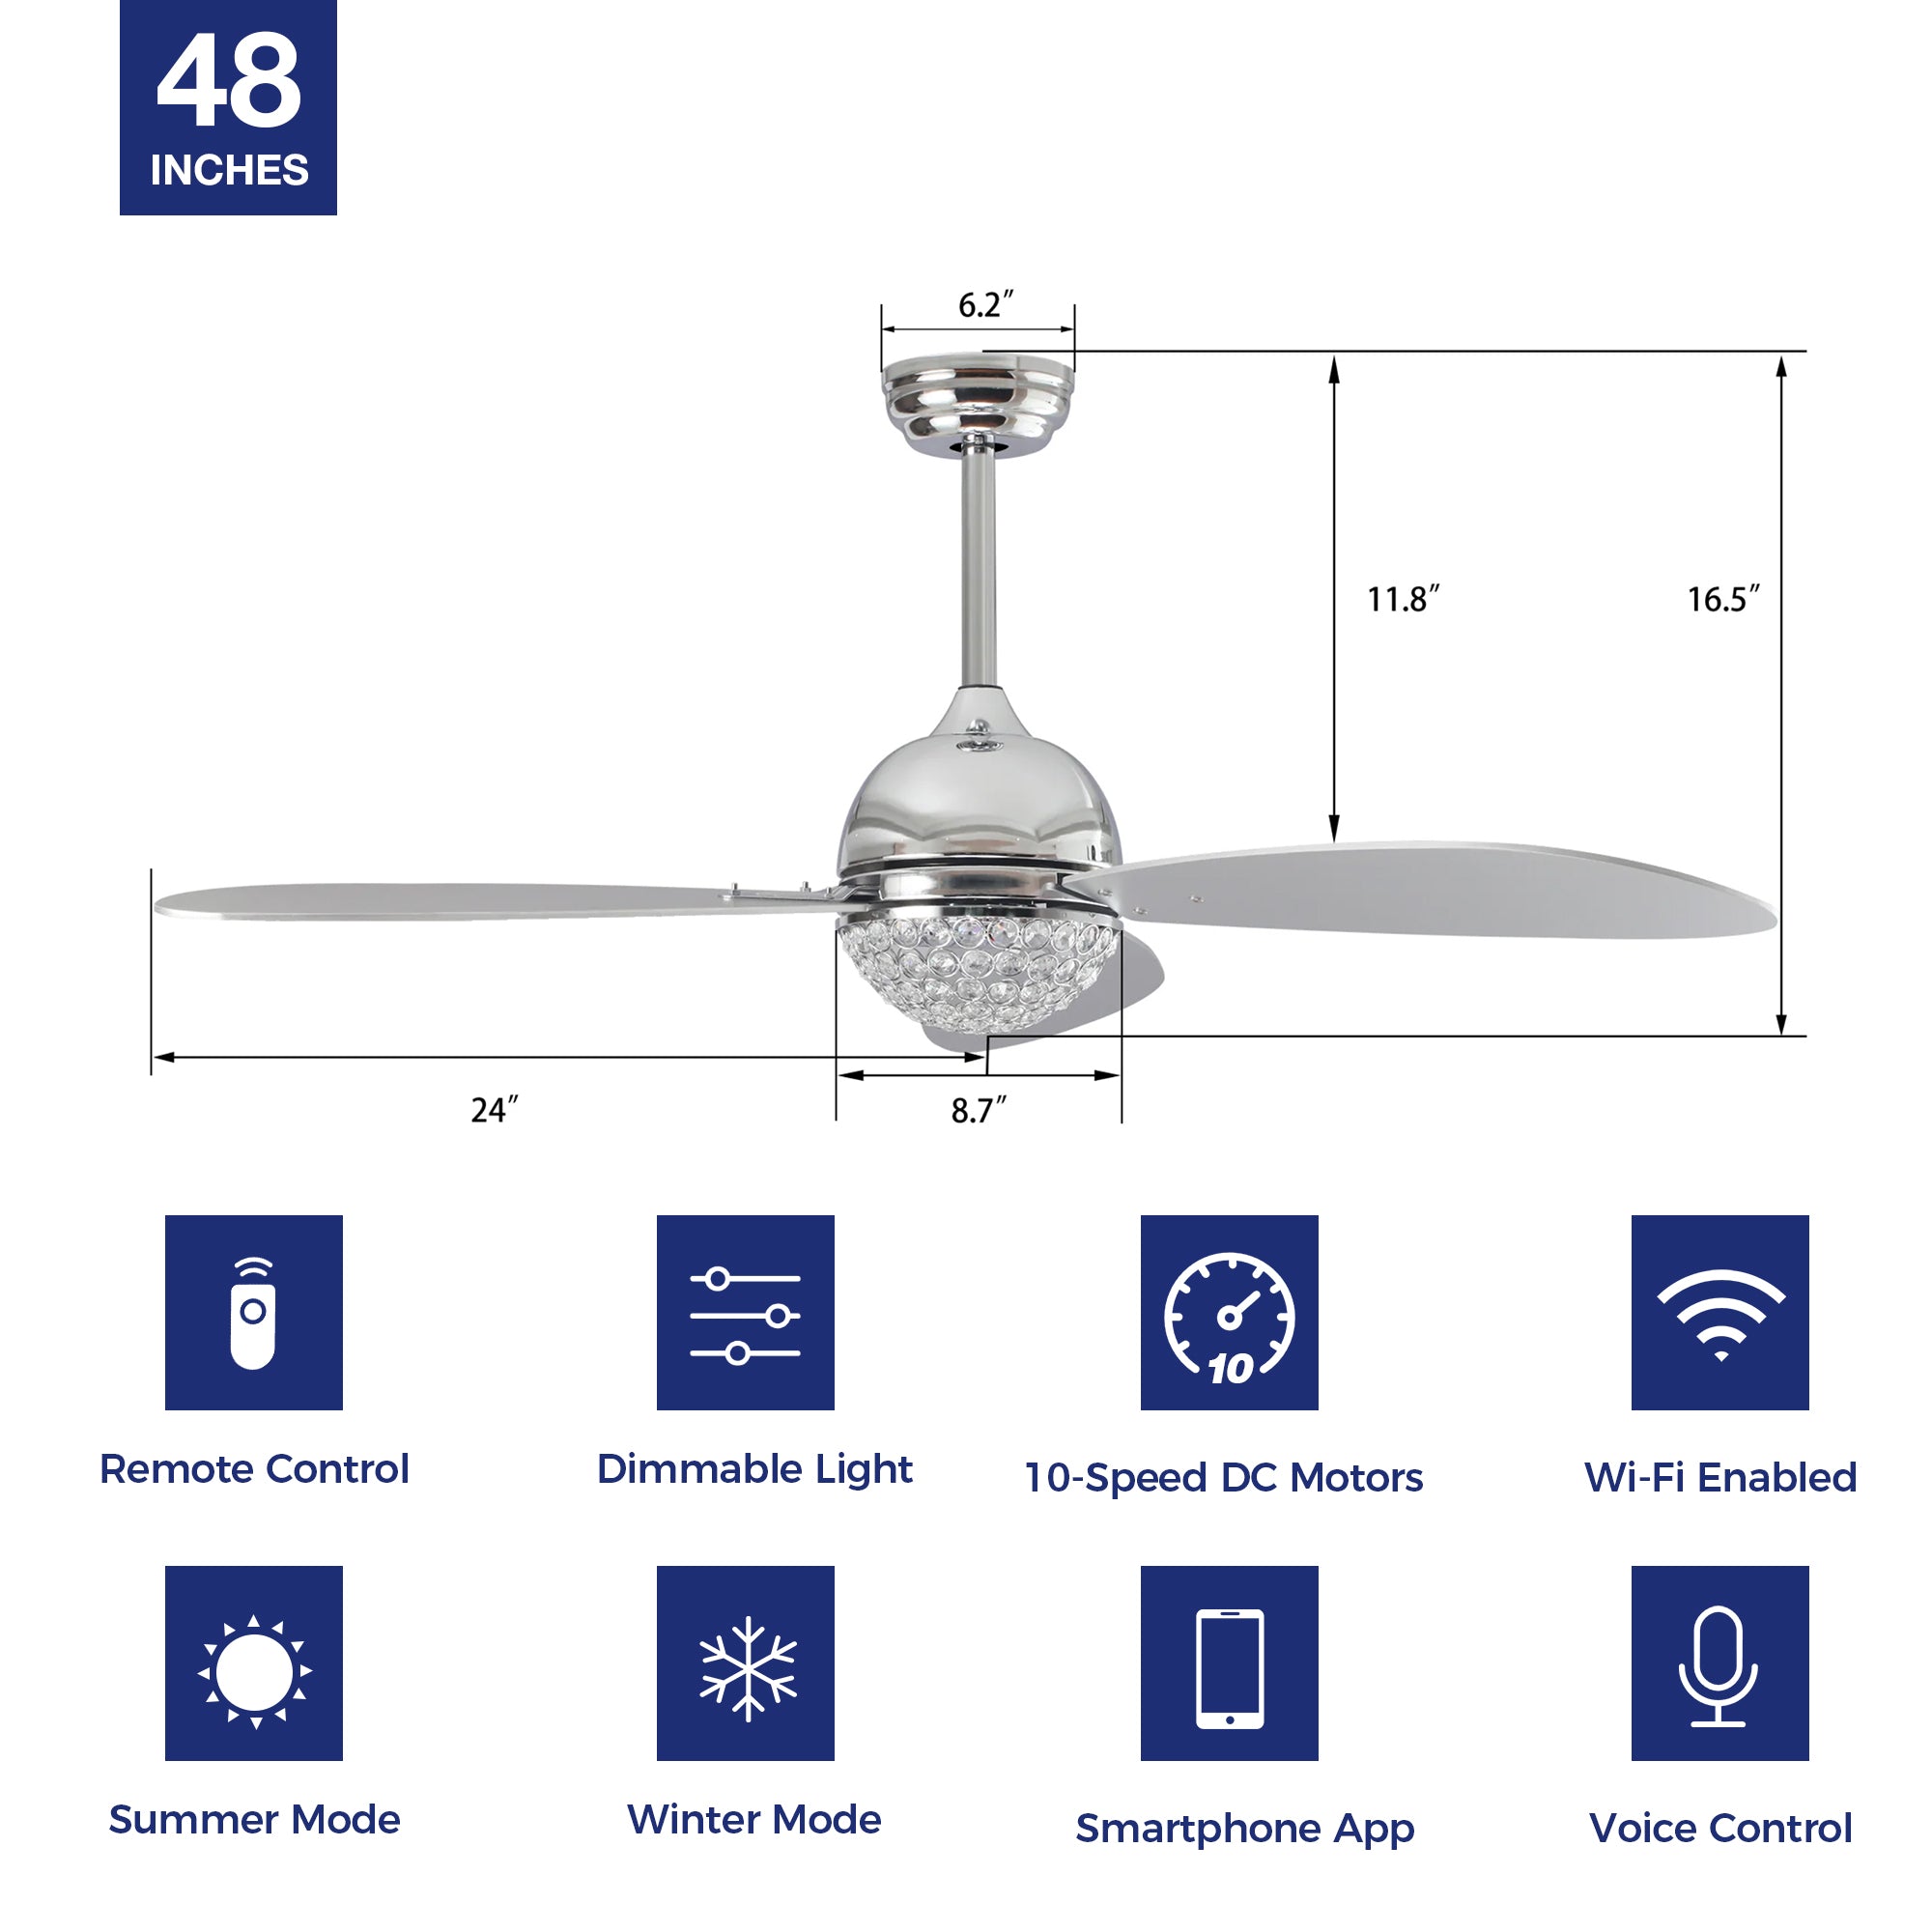 This Corvin 48&#39;&#39; smart ceiling fan keeps your space cool, bright, and stylish. It is a soft modern masterpiece perfect for your large indoor living spaces. This Wifi smart ceiling fan is a simplicity designing with Silver finish, use elegant Plywood blades and has an integrated 4000K LED cool light. The fan features Remote control, Wi-Fi apps, Siri Shortcut and Voice control technology (compatible with Amazon Alexa and Google Home Assistant ) to set fan preferences.